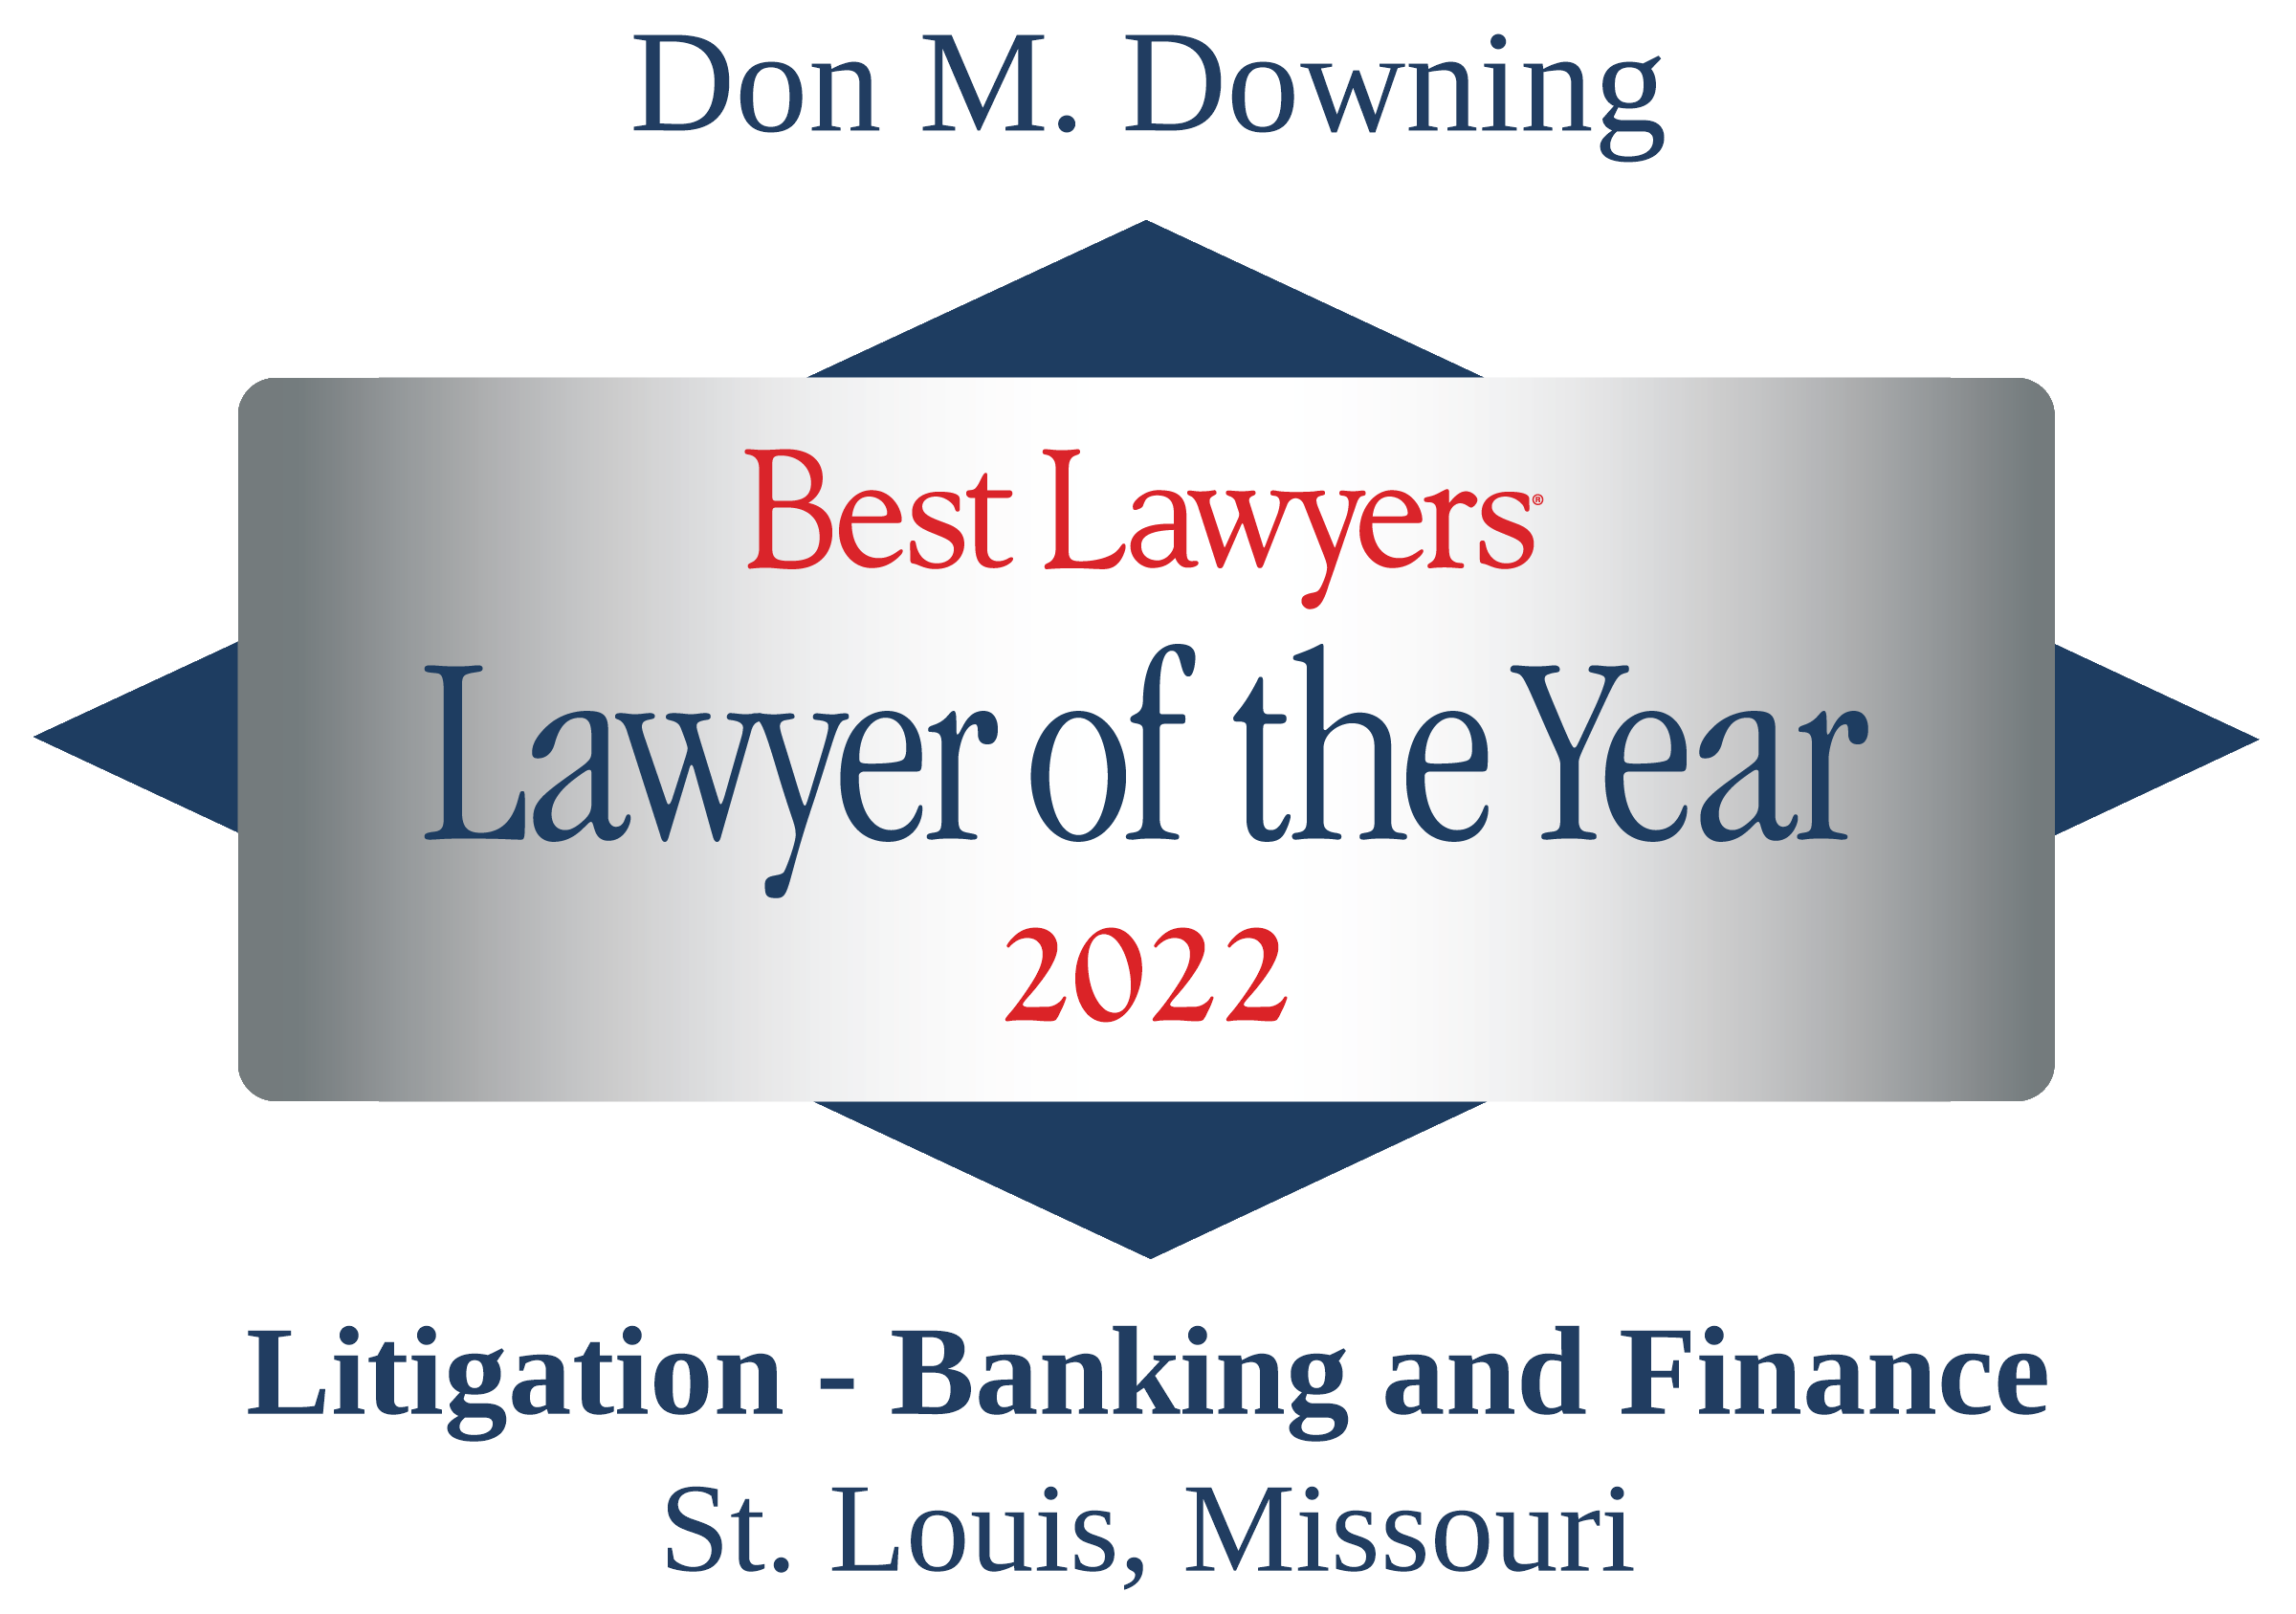 Don Downing Lawyer of the Year 2022 badge